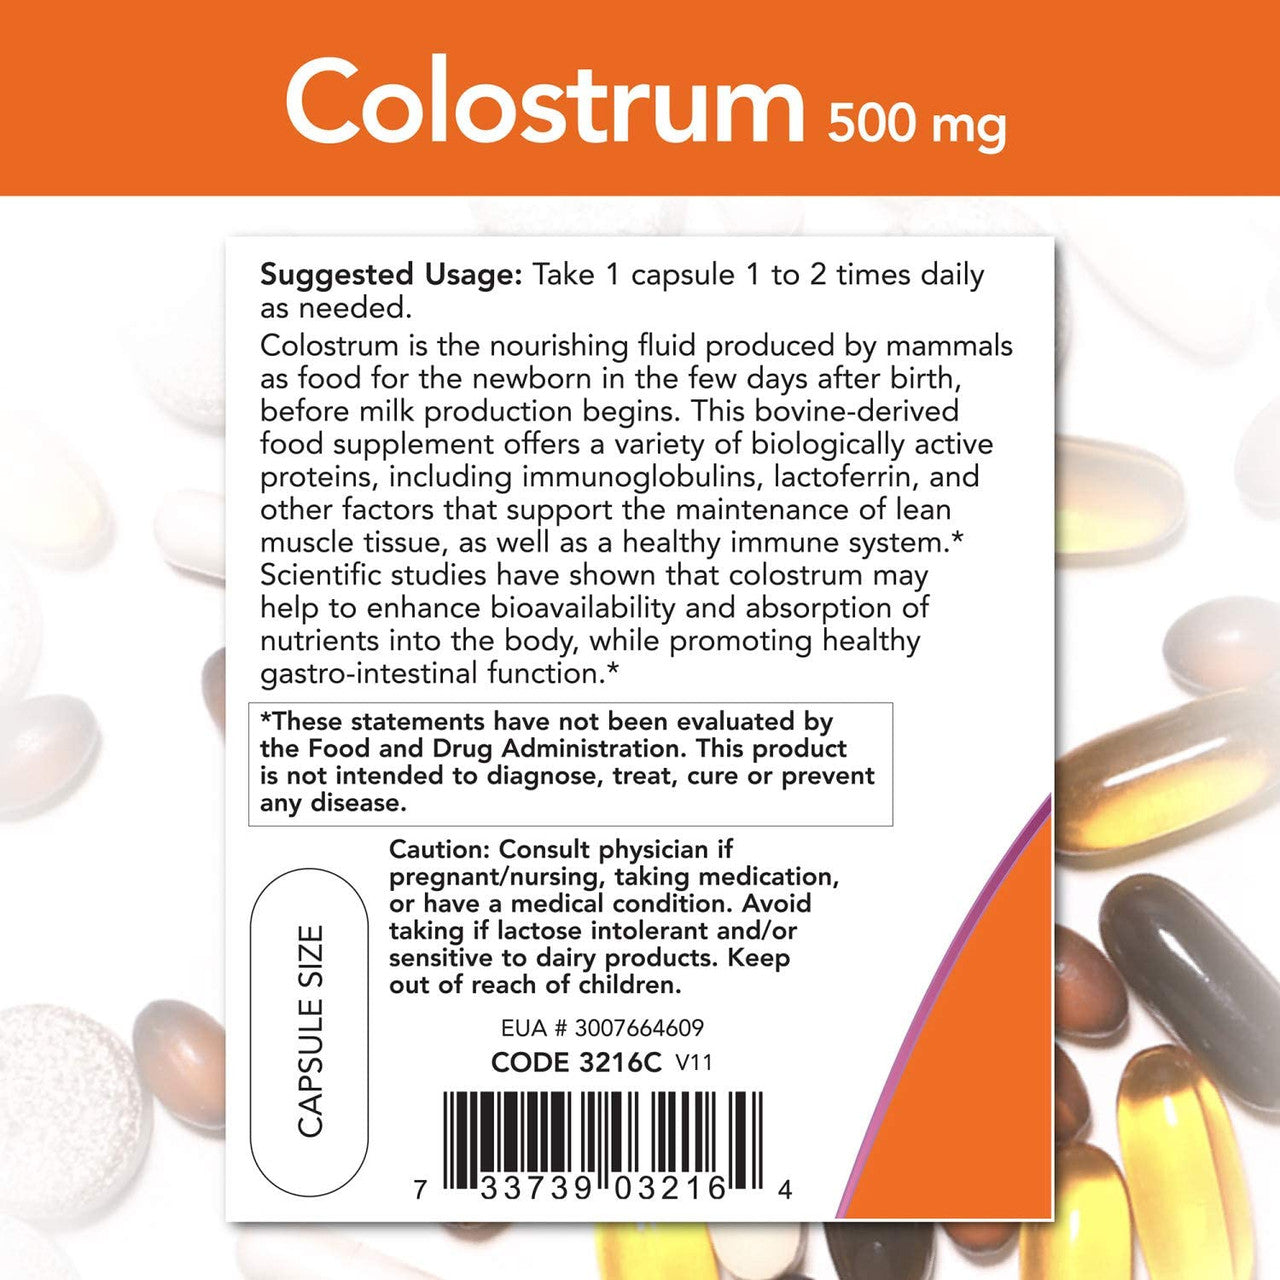 Now Colostrum 500 mg directions